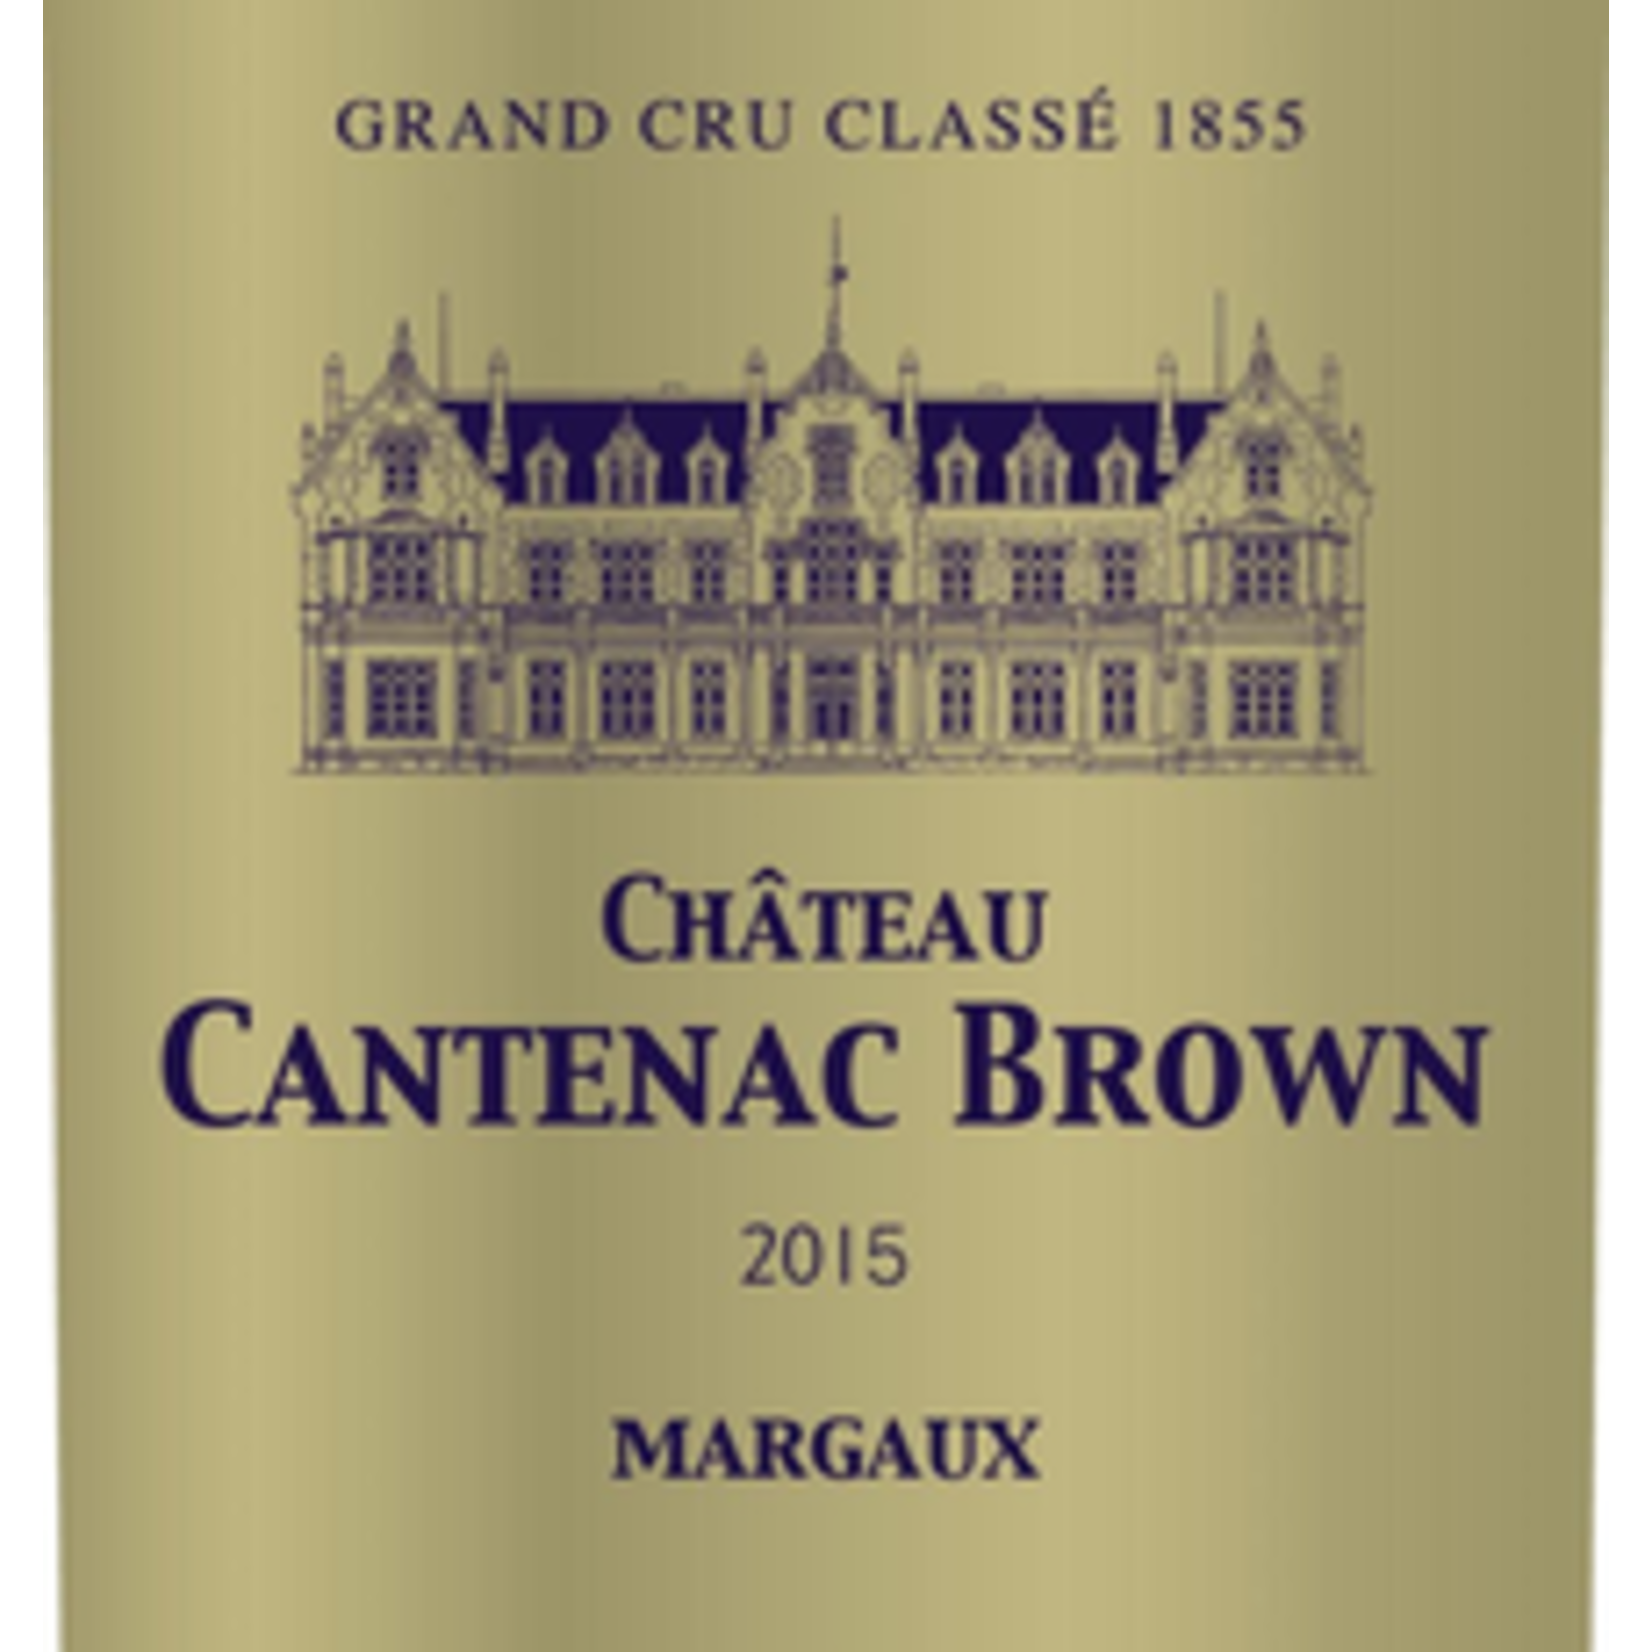 Wine Chateau Cantenac Brown Margaux 2015